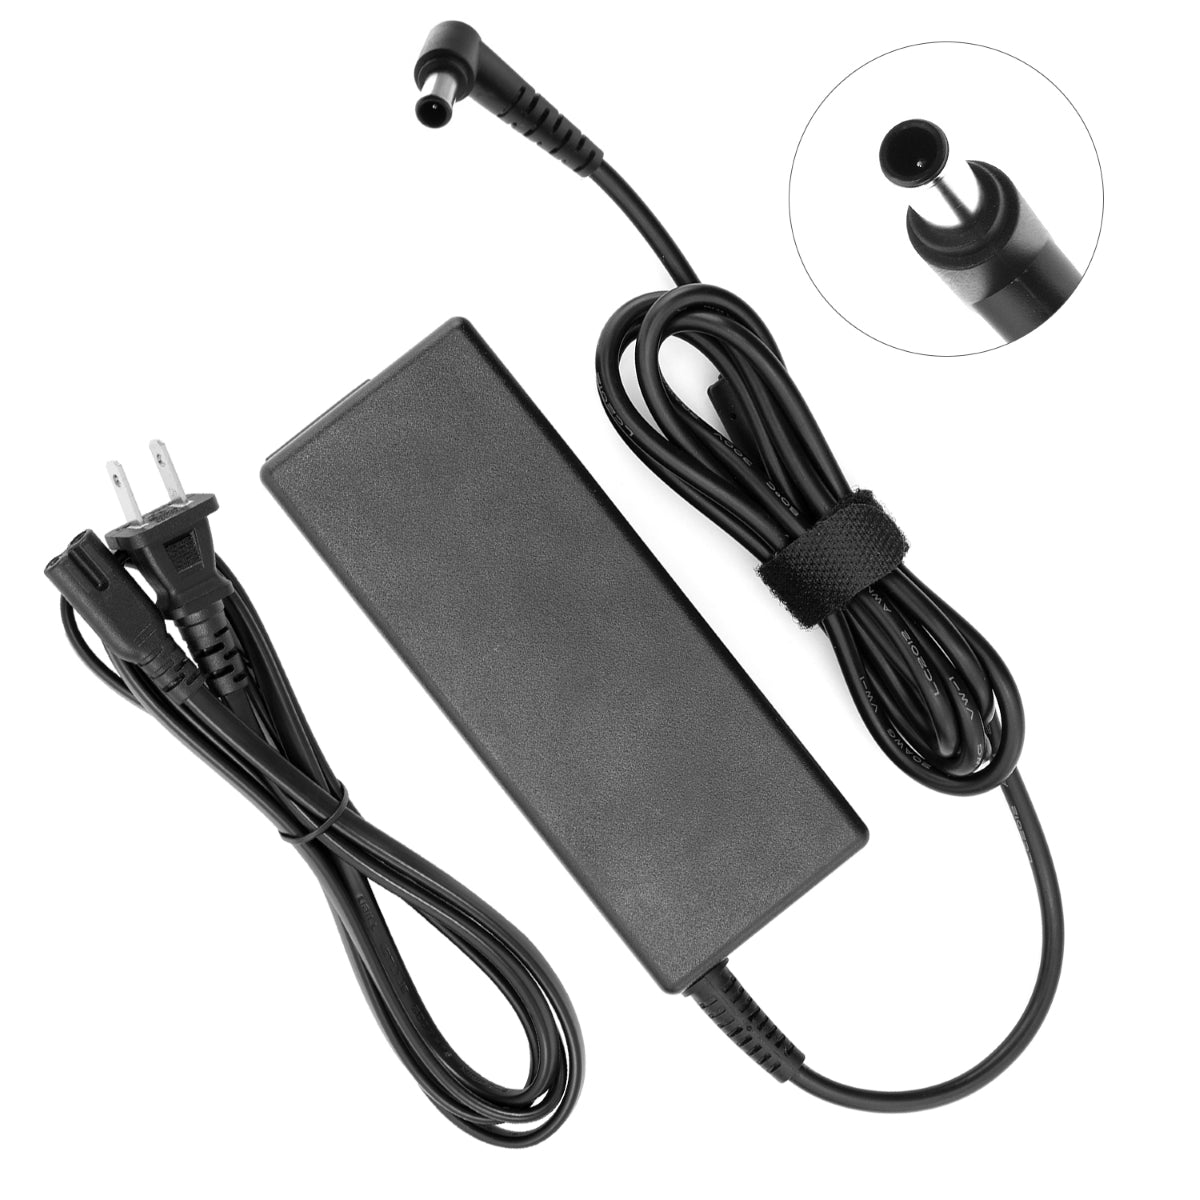 Compatible Charger for Sony Vaio PCG-71C11L